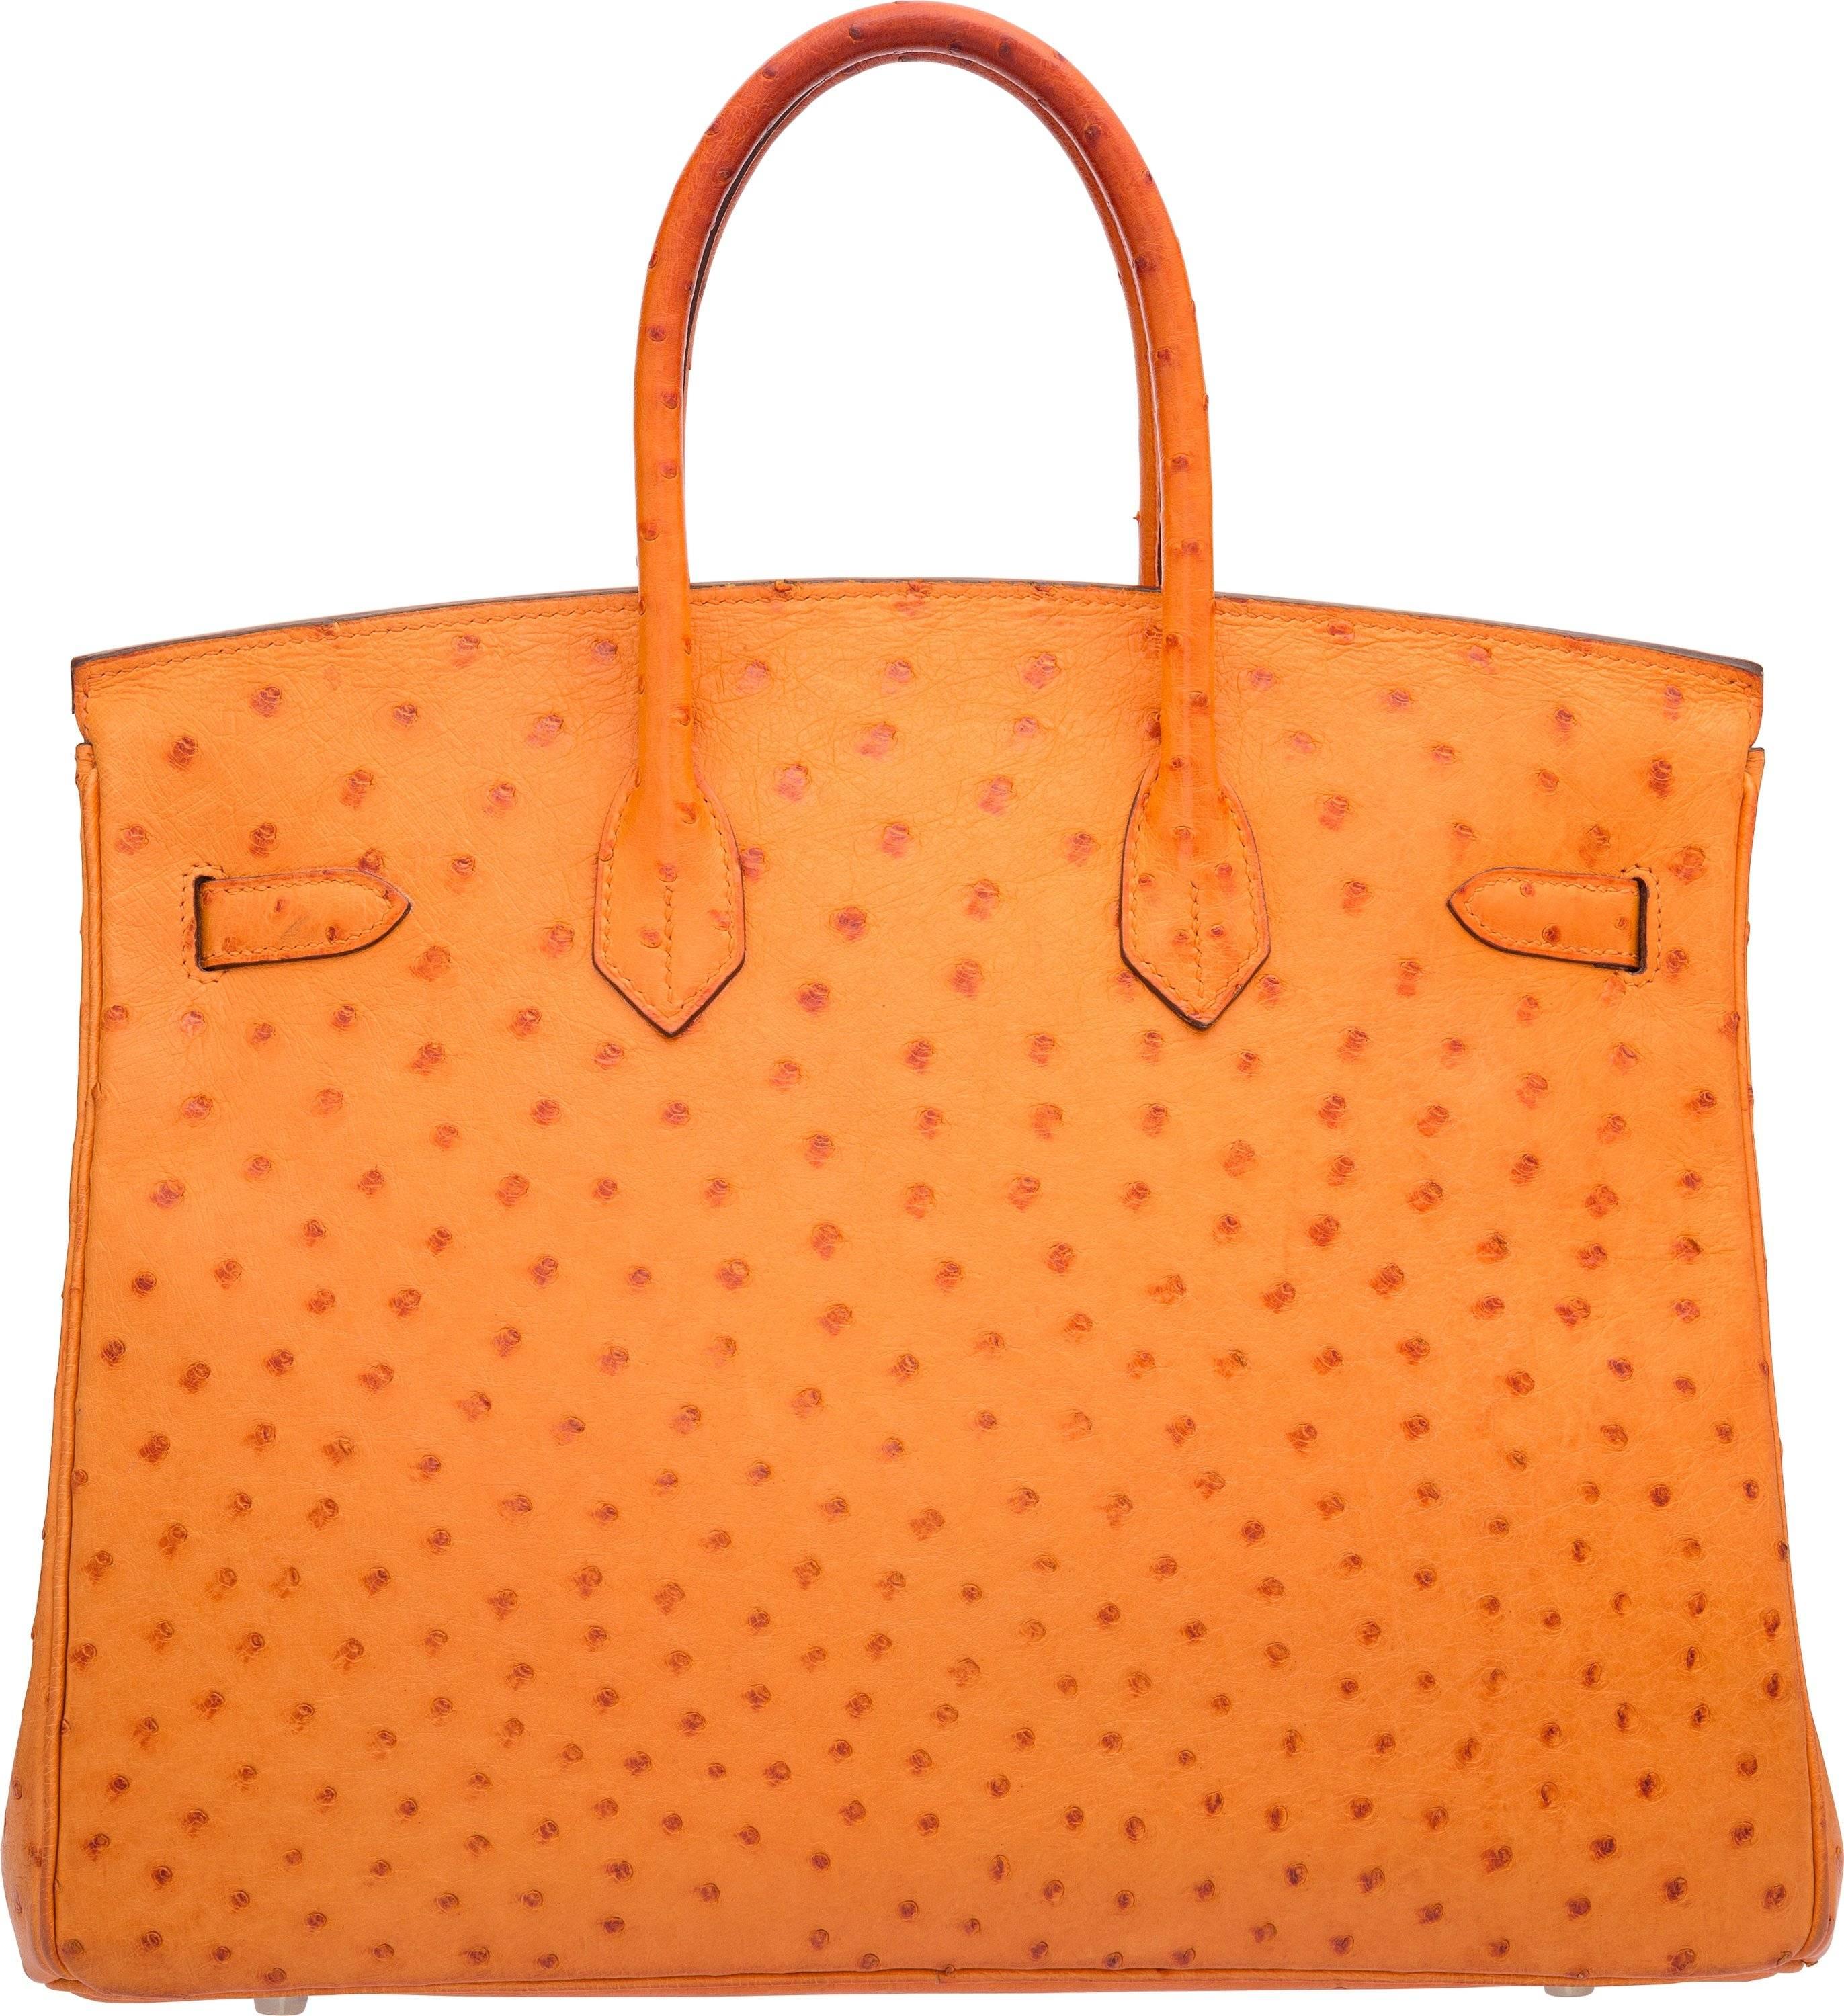 This Birkin bag is done in Tangerine Ostrich, featuring two rolled handles, Palladium Hardware, and a flap top with a turnlock closure. The interior is done in matching Tangerine Chevre Leather, featuring one zip pocket and one slip pocket. This bag